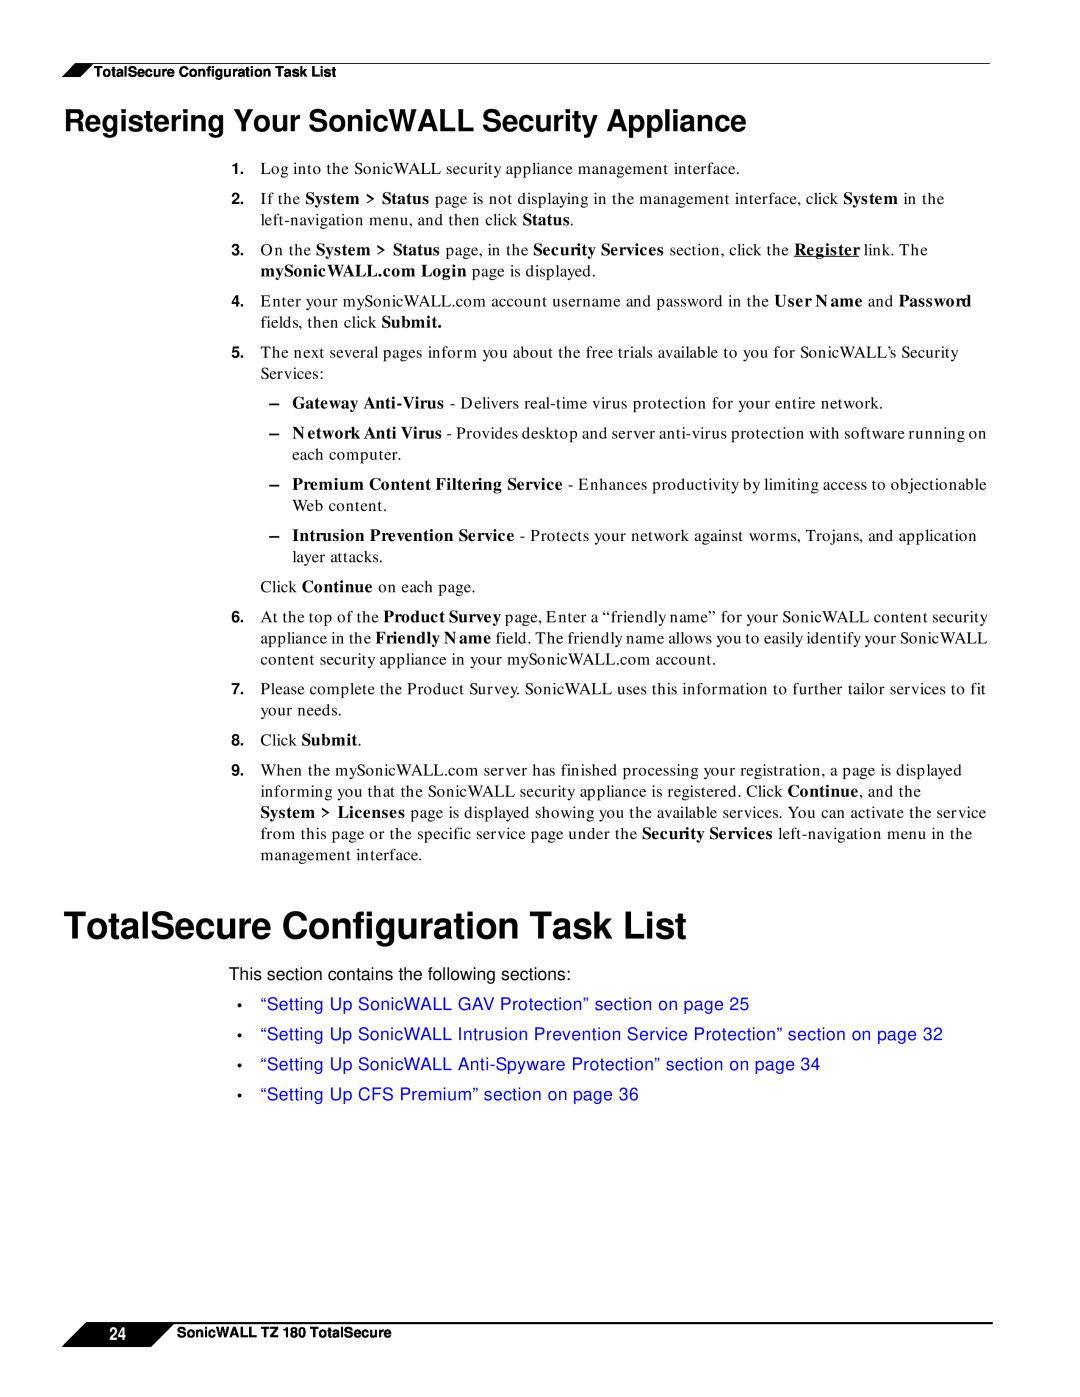 SonicWALL TZ 180 manual TotalSecure Configuration Task List, Registering Your SonicWALL Security Appliance 